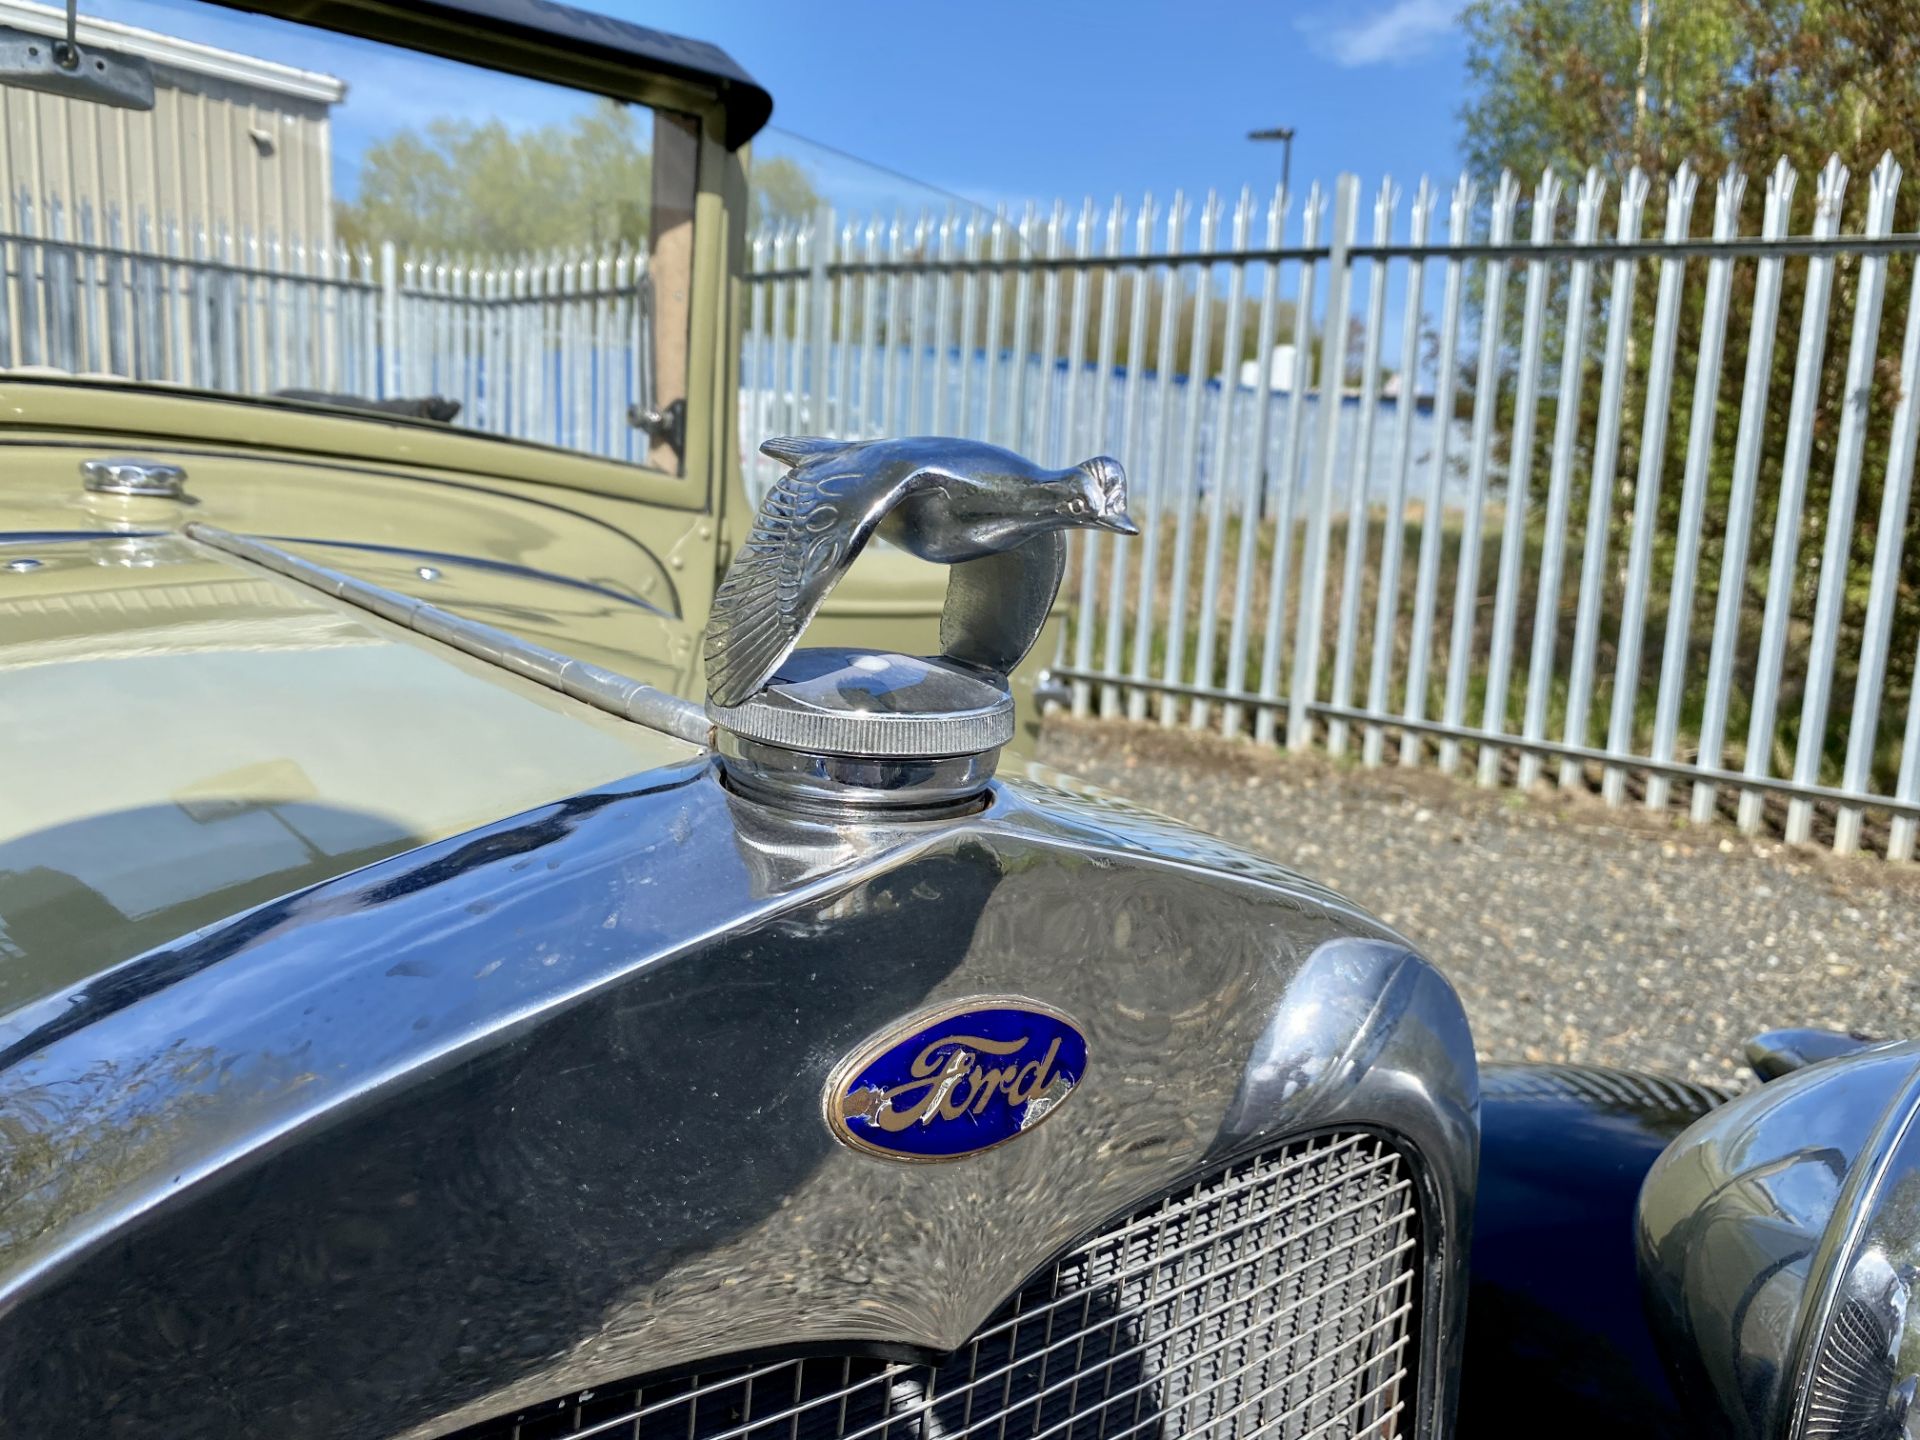 Ford Model A Roadster - Image 35 of 49